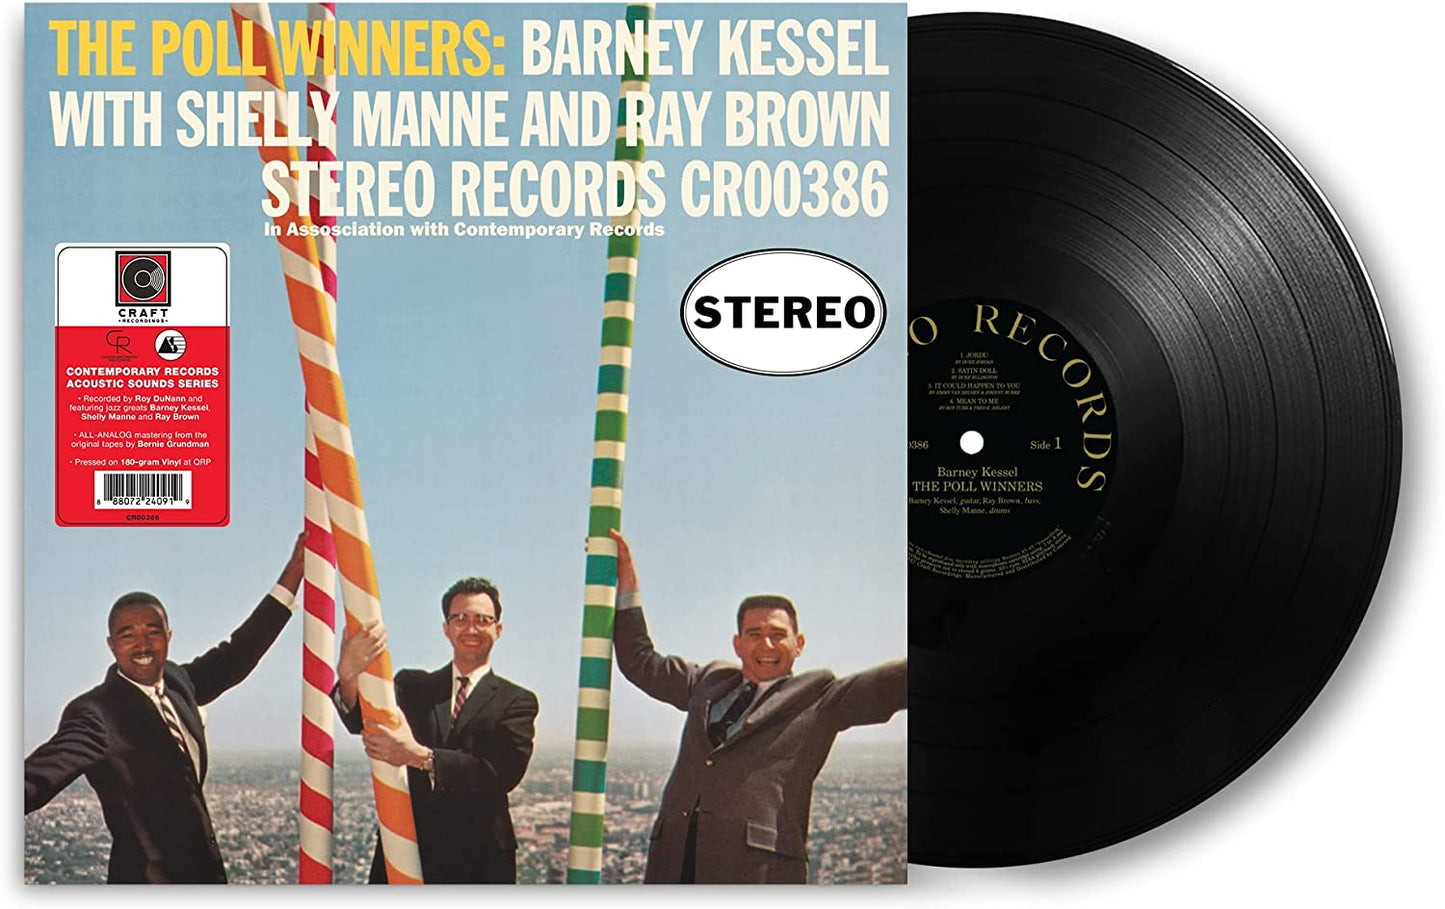 Barney Kessell, Shelly Manne and Ray Brown - The Poll Winners - LP